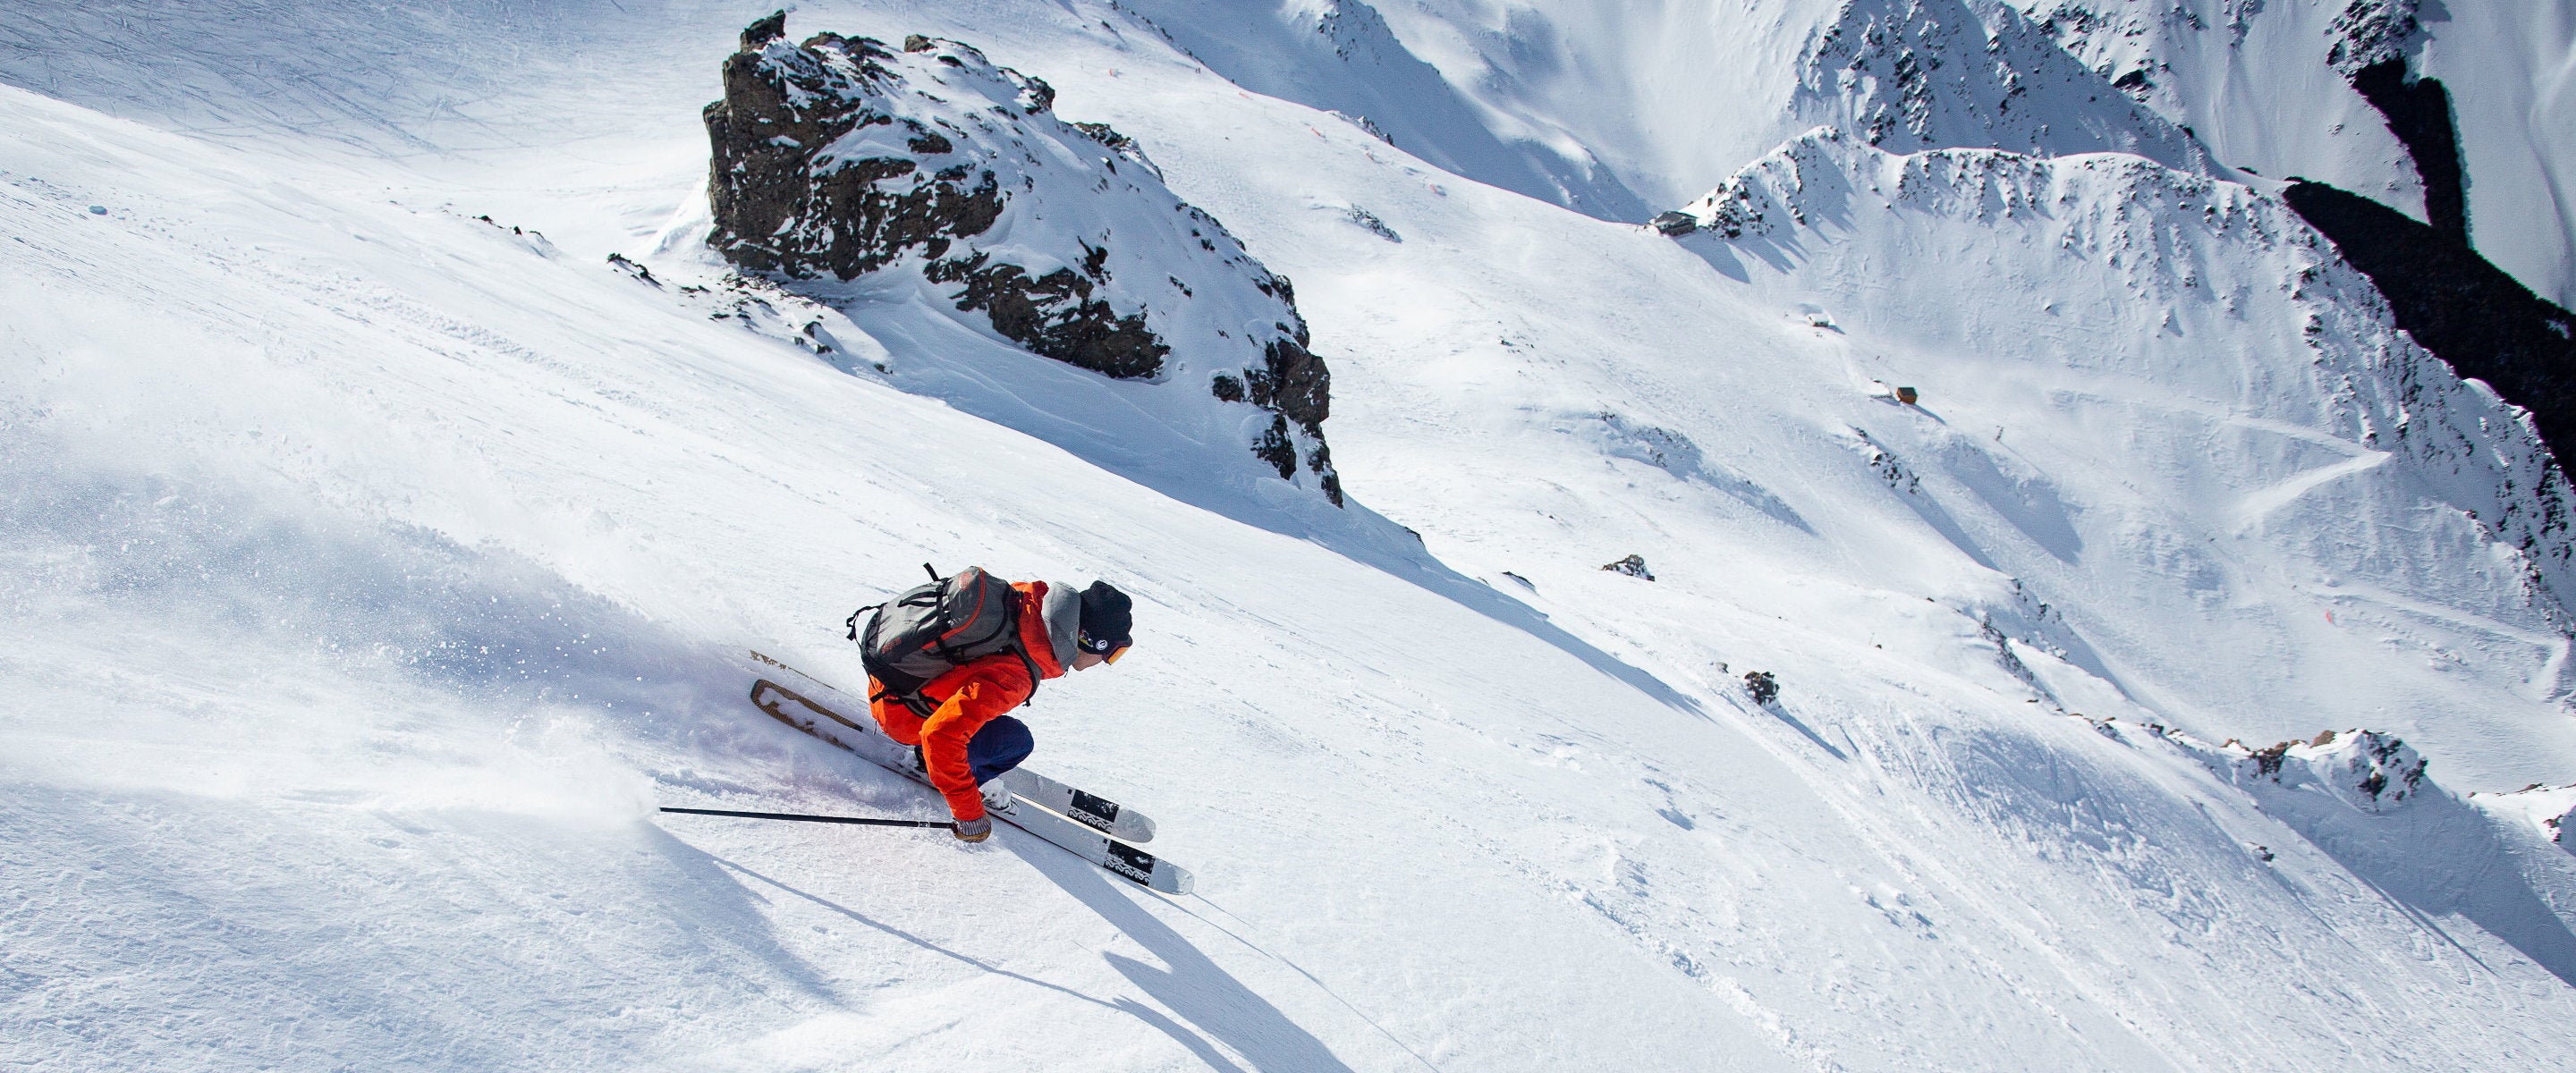 Types of alpine skis: how to choose? – Oberson